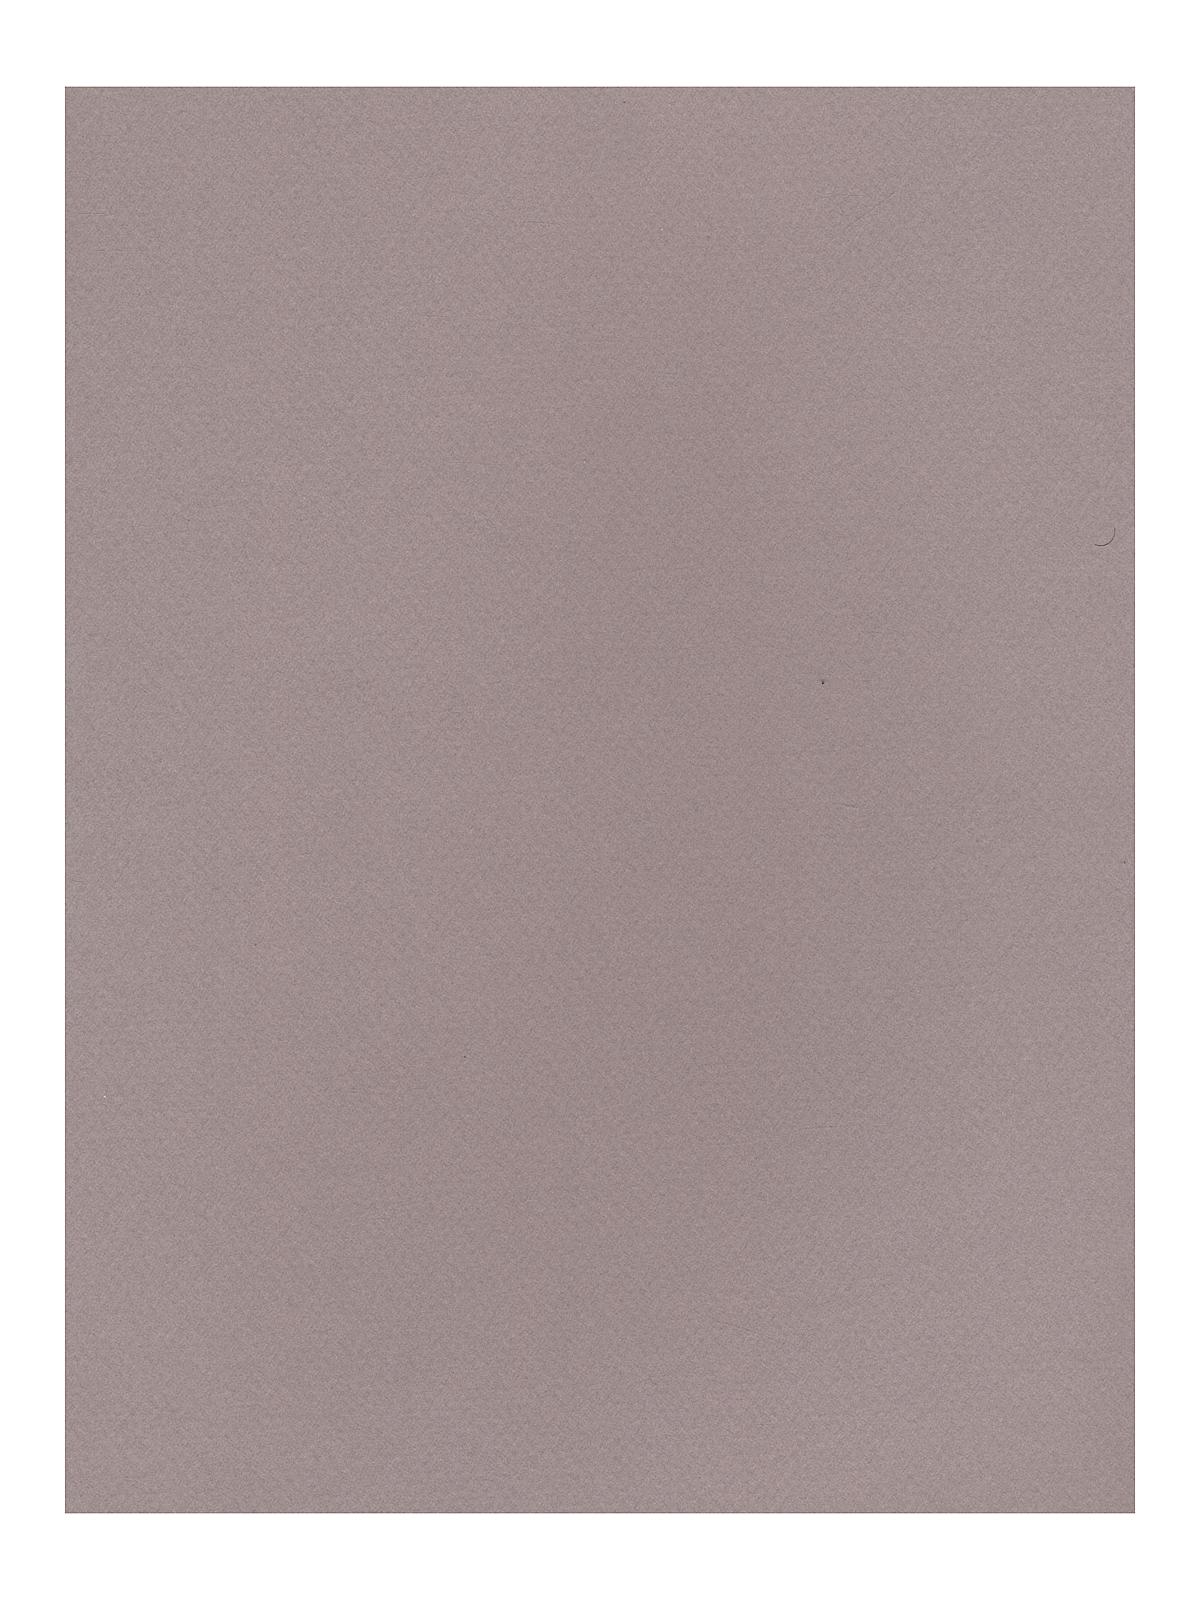 Mi-teintes Tinted Paper Flannel Grey 8.5 In. X 11 In.